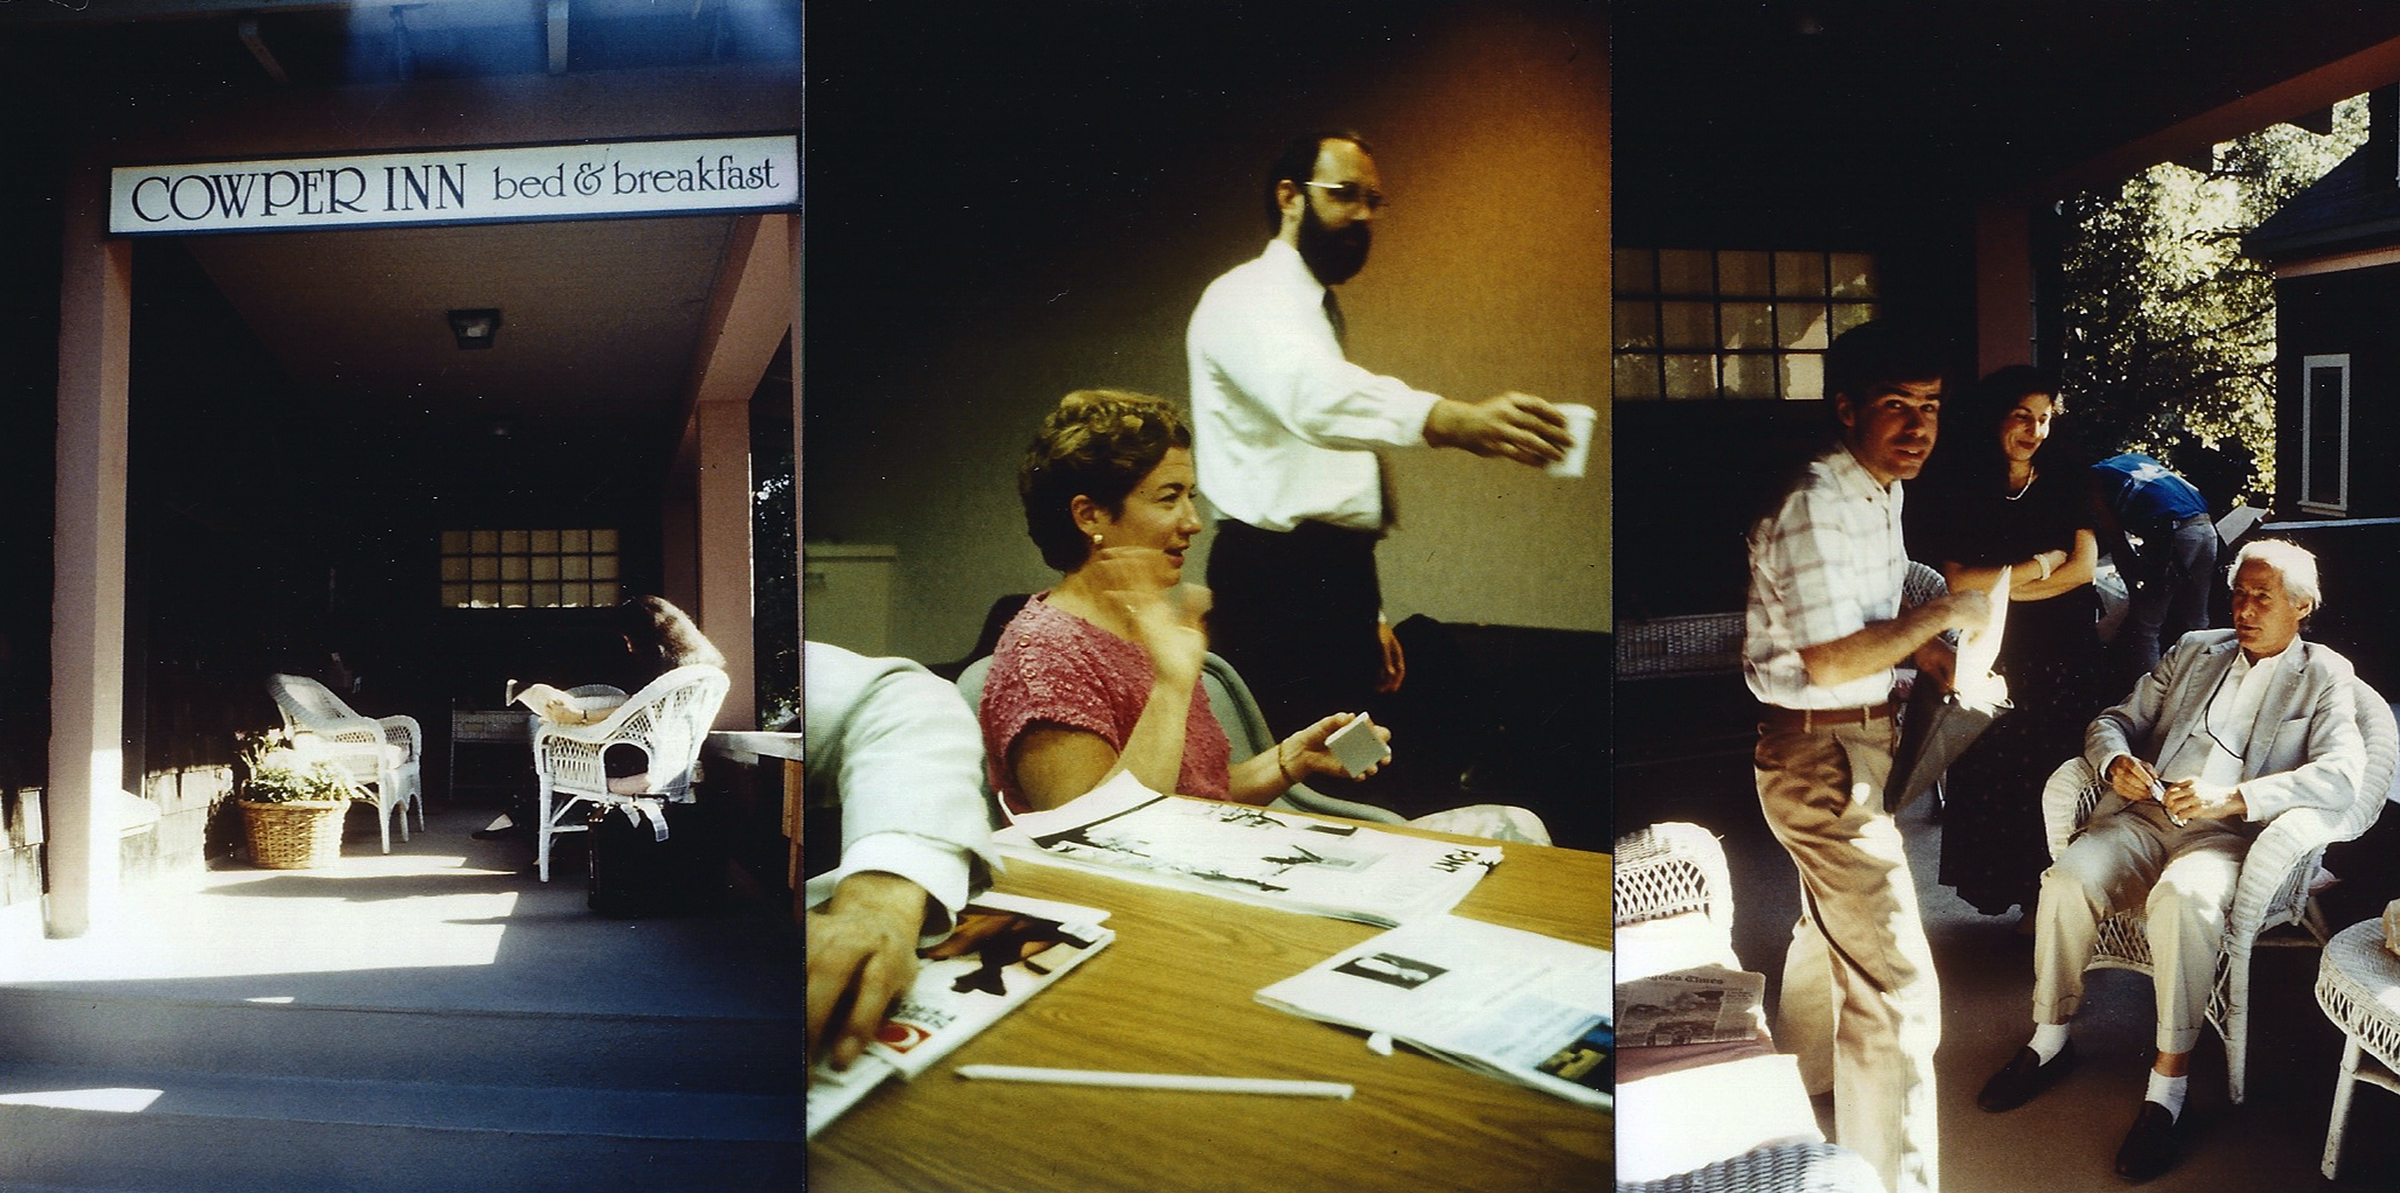 According to Spiekermann: “These three pictures are a scan of very bad and very small color prints from photos I took back in 1988 or 1989.” Far left: The Type Board meeting place at the Cowper Inn in Palo Alto; center: Liz Bond and Sumner Stone; far right, pictured from left: Type Board members Stephen Harvard, Louise Fili, and Jack Stauffacher.